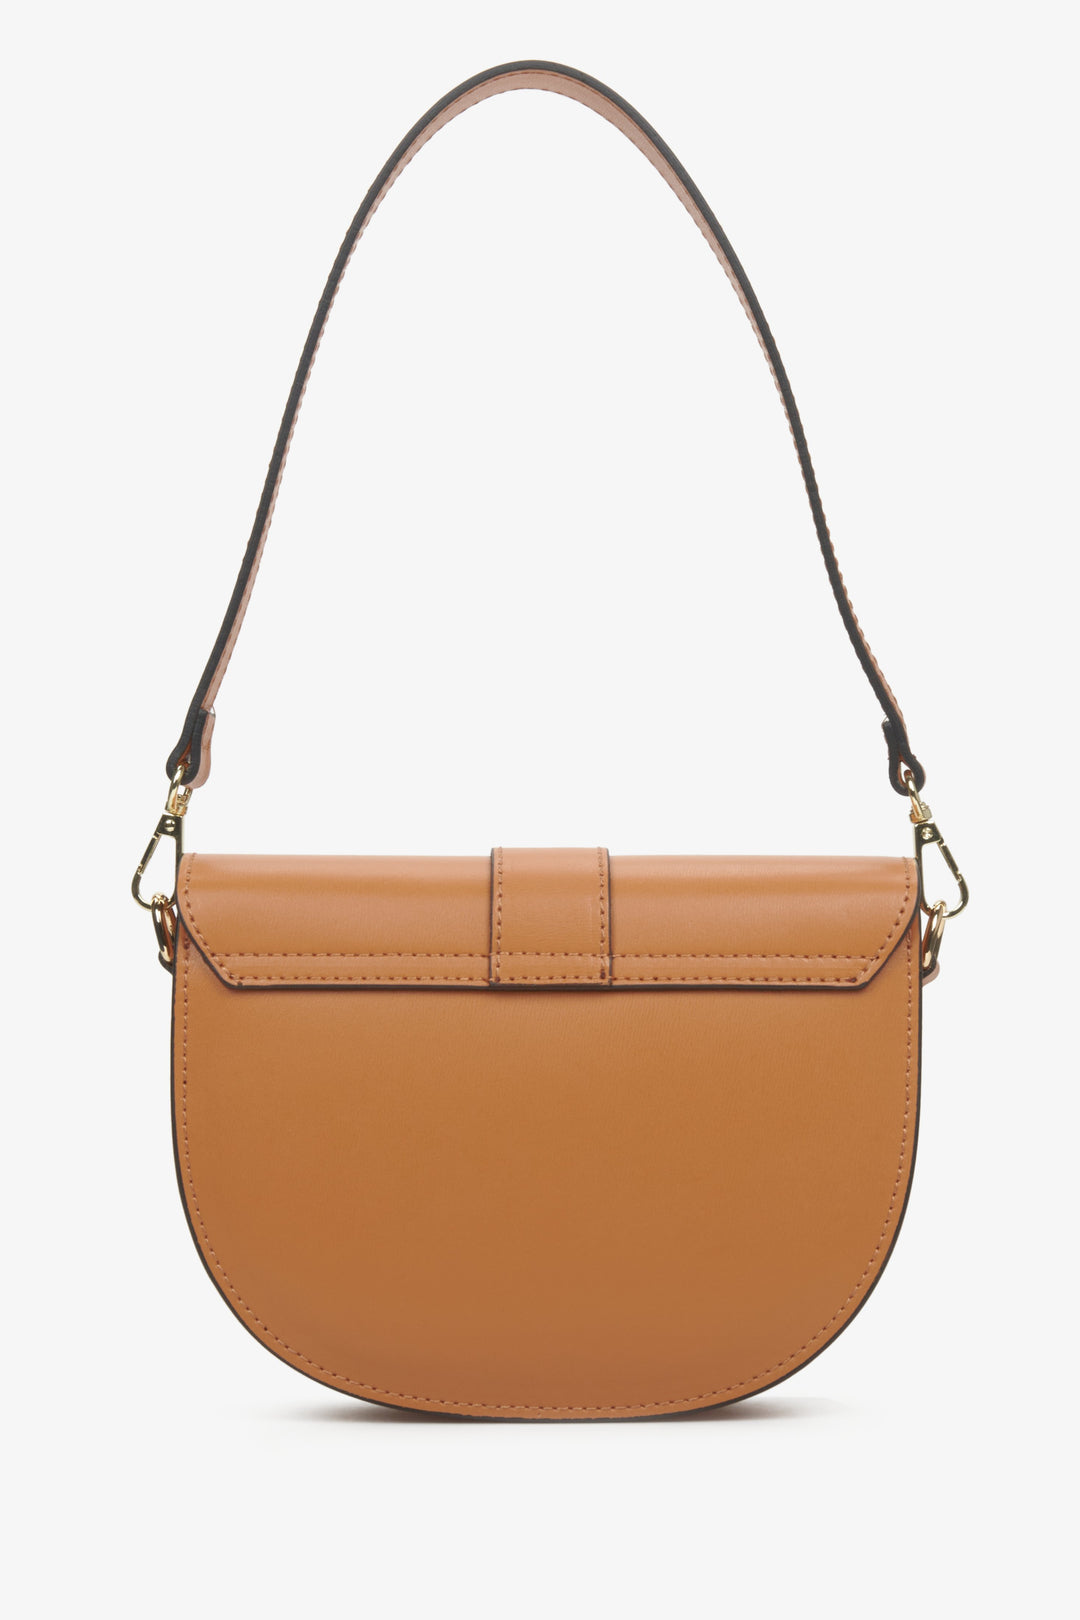 Women's brown shoulder bag made from genuine leather in the shape of a horseshoe.